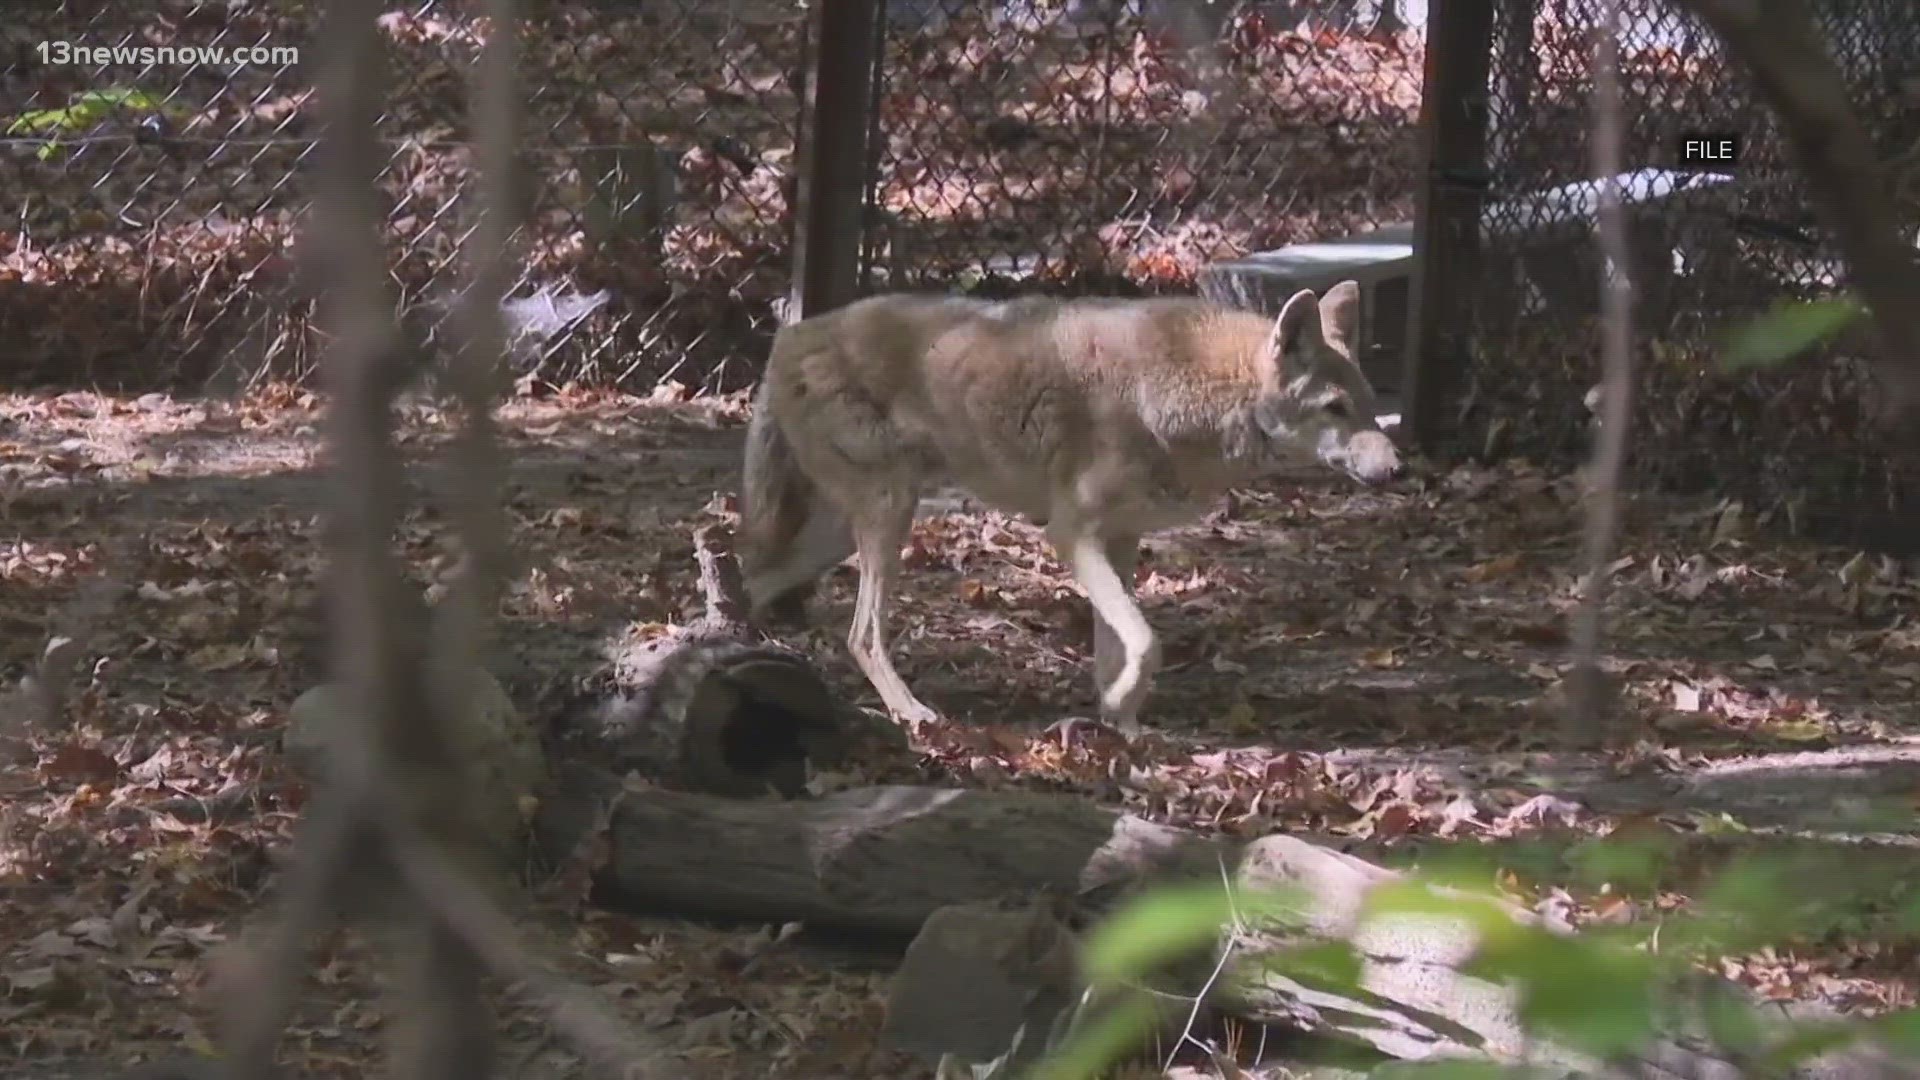 City officials recently posted on Facebook about an increase in coyote reports.